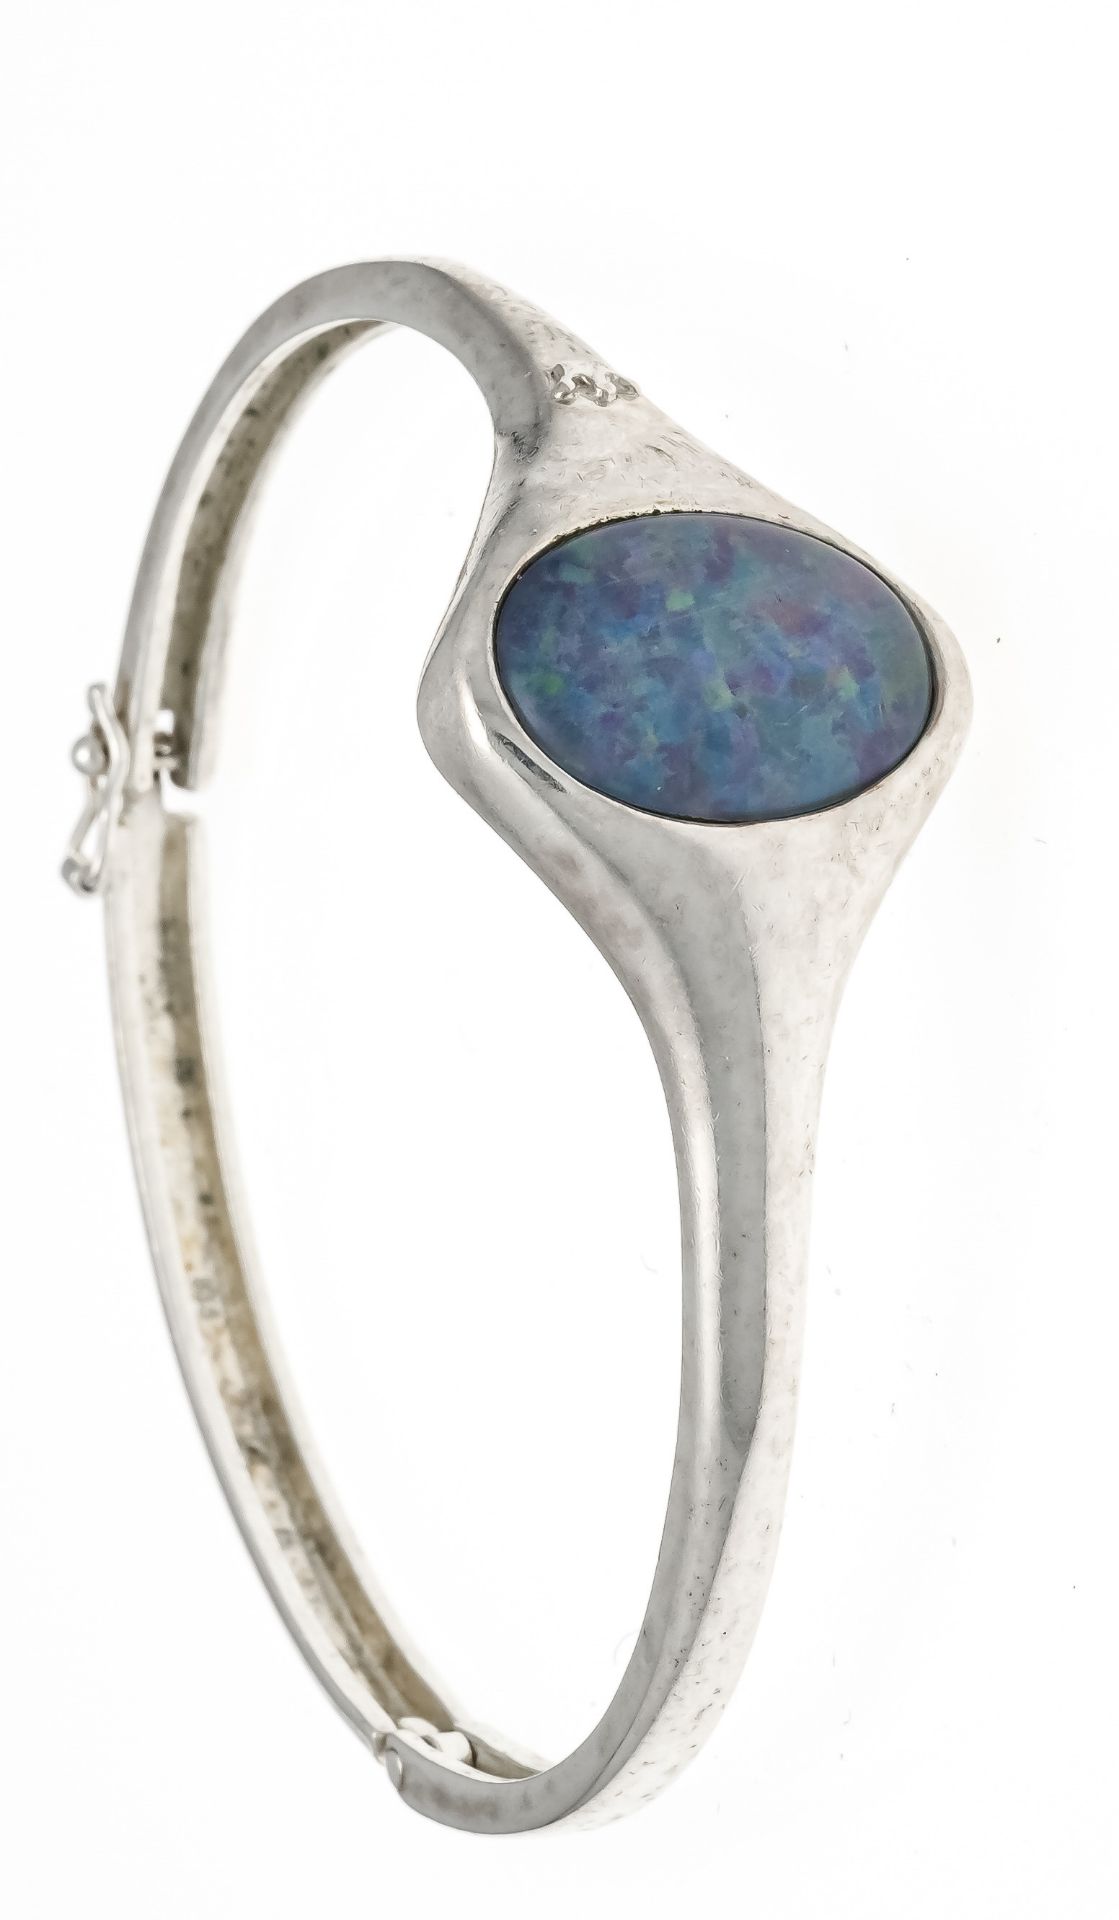 Opal hinged bangle silver 835/000 with an oval opal triplet 18 x 13 mm in a colorful play of colors,